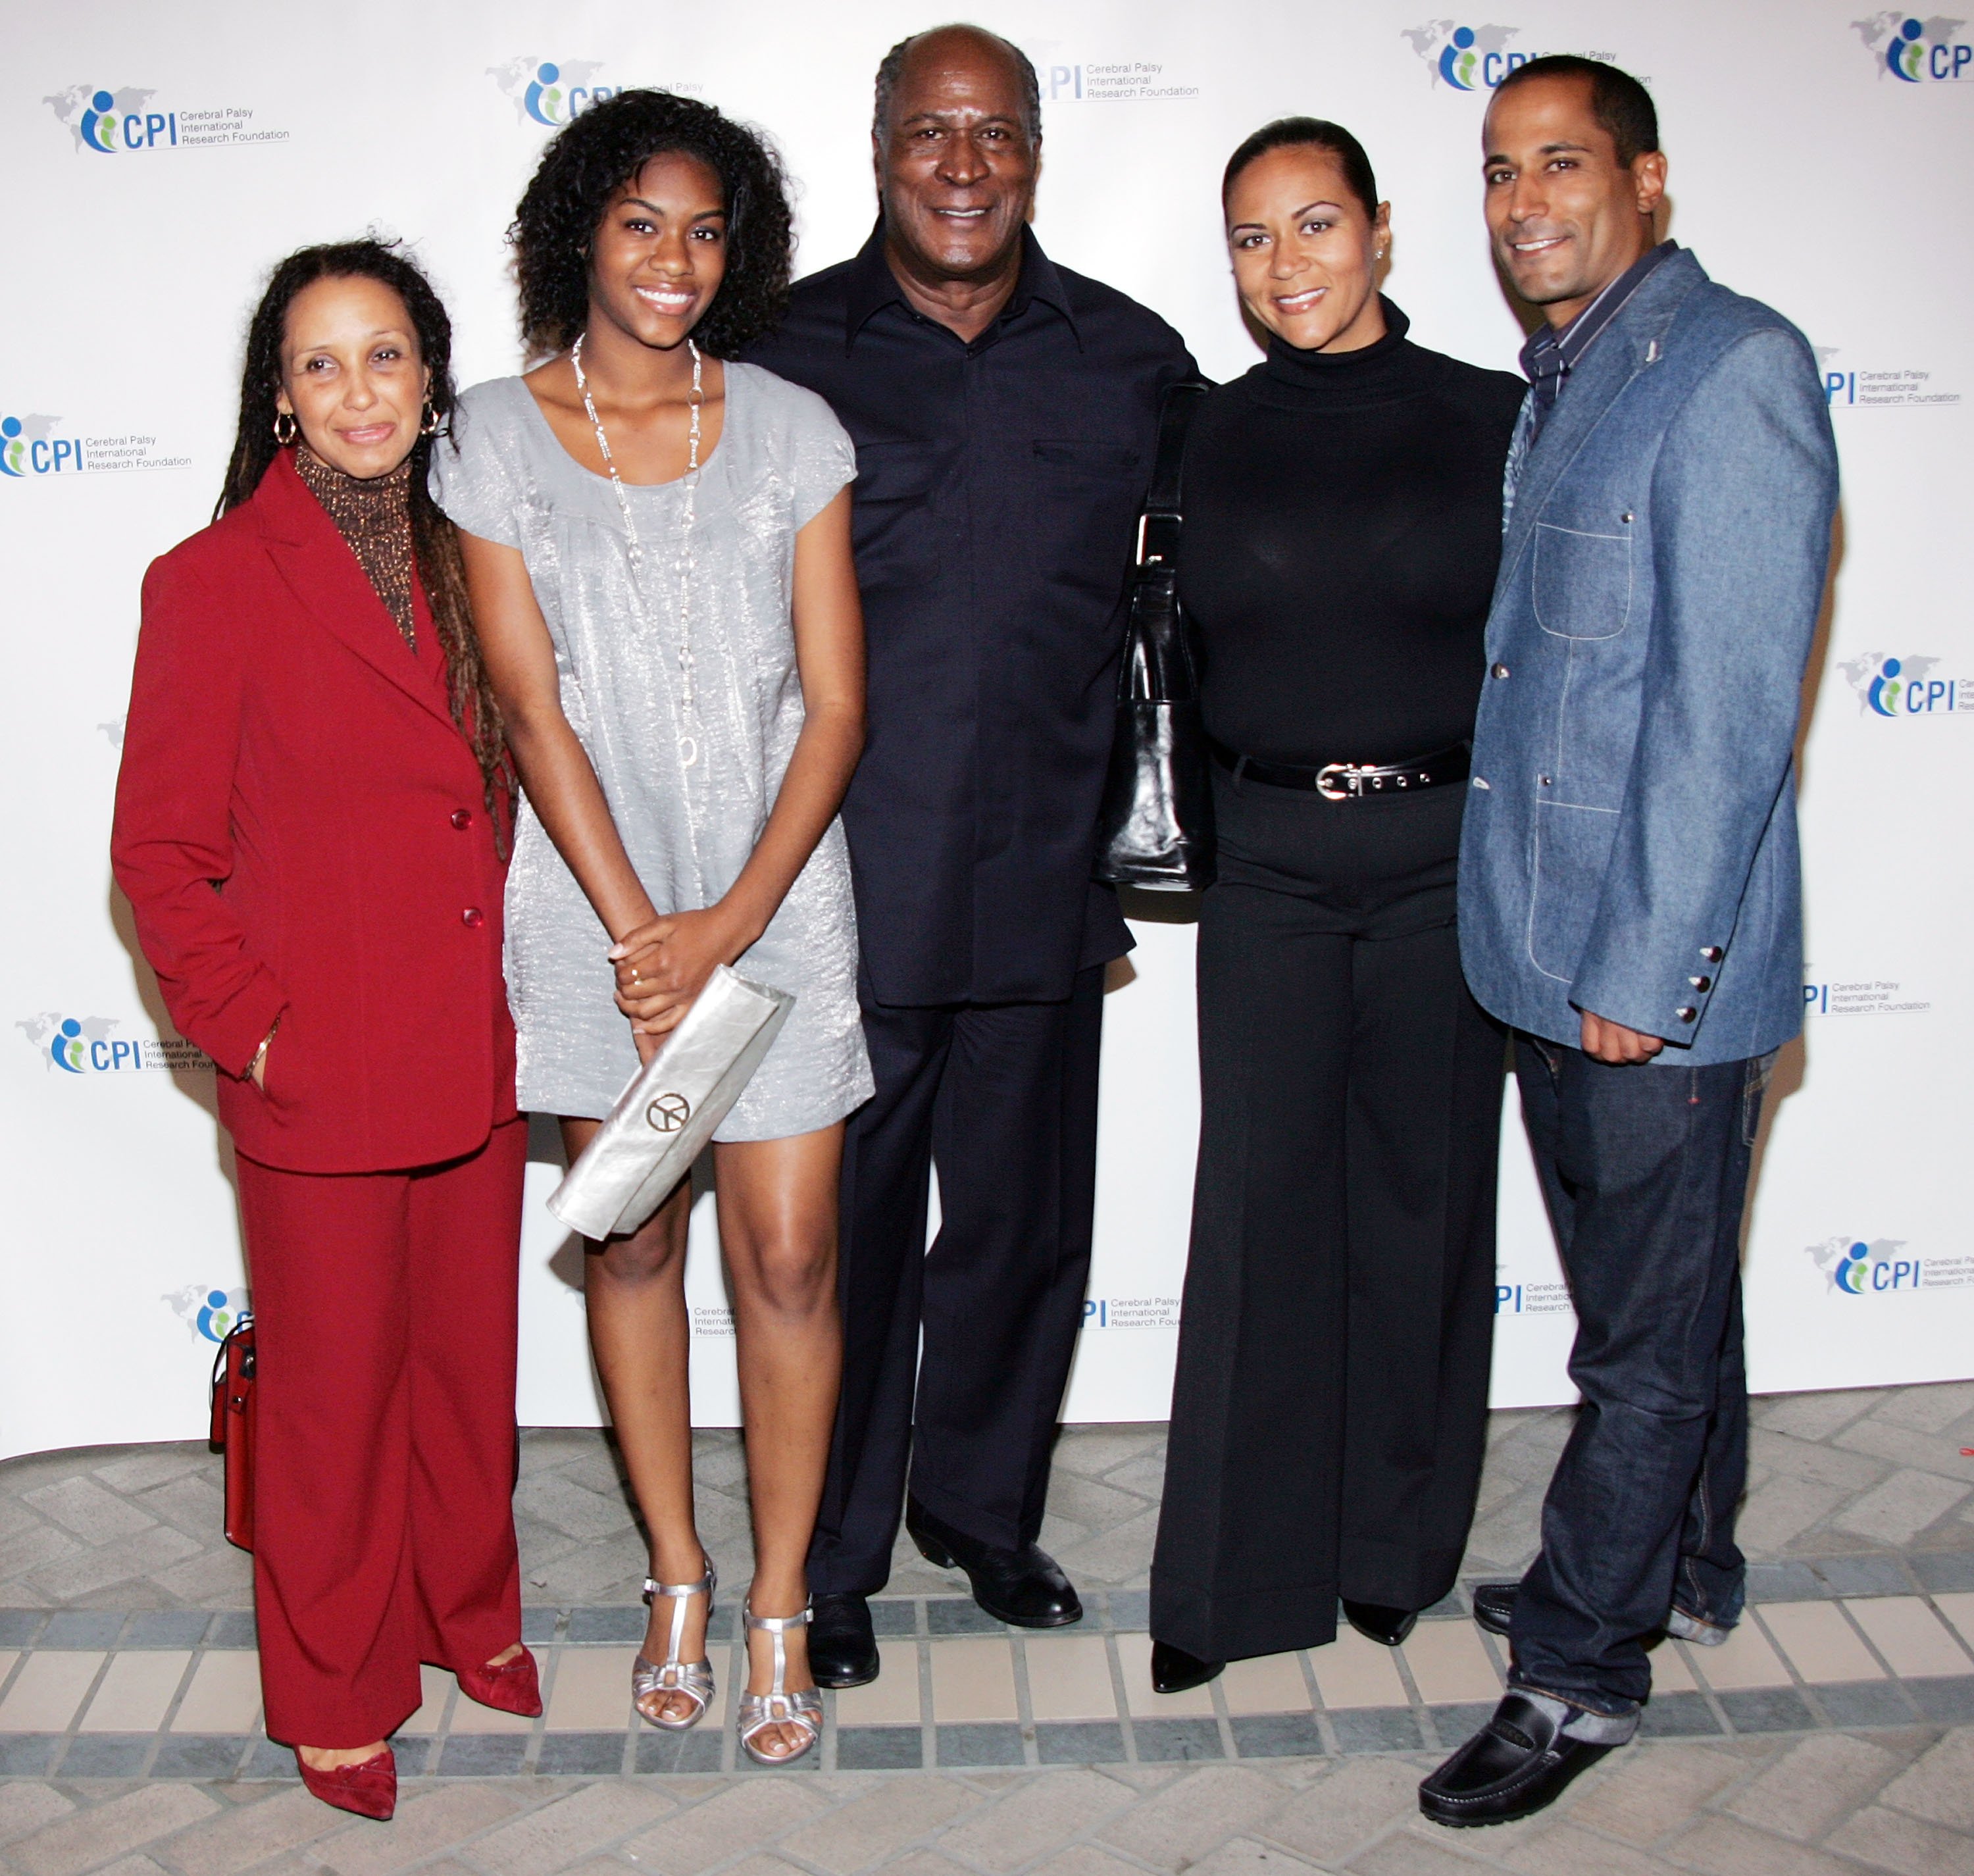 John Amos, Shannon Amos, K.C. Amos and friends on December 3, 2008 in Los Angeles, California | Photo: Getty Images